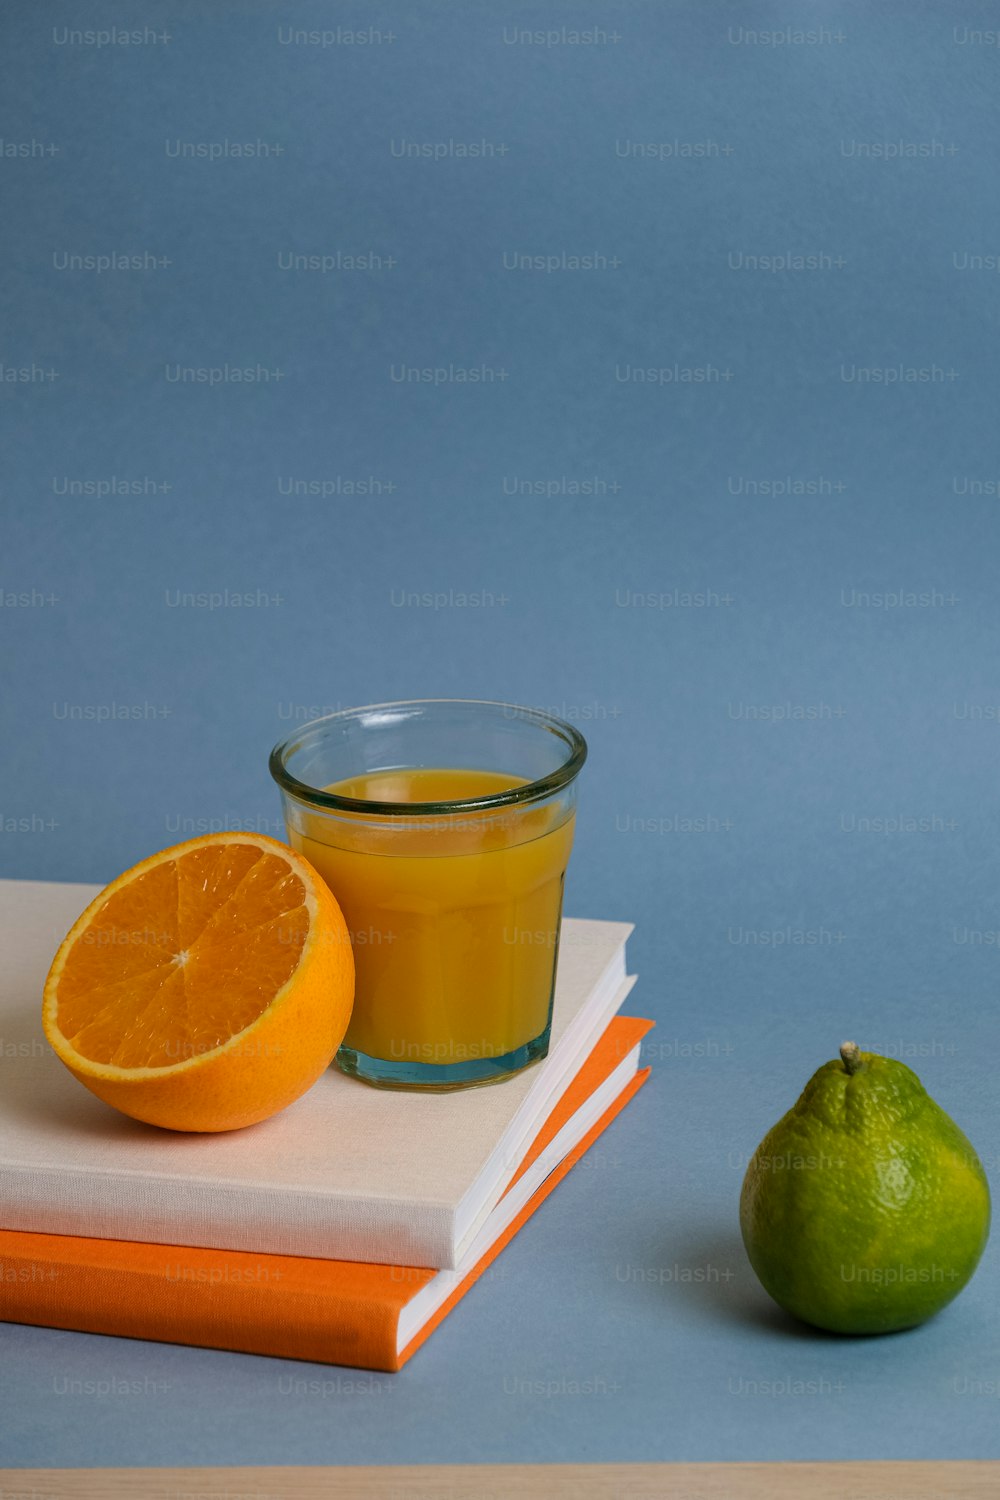 a glass of orange juice next to a stack of books